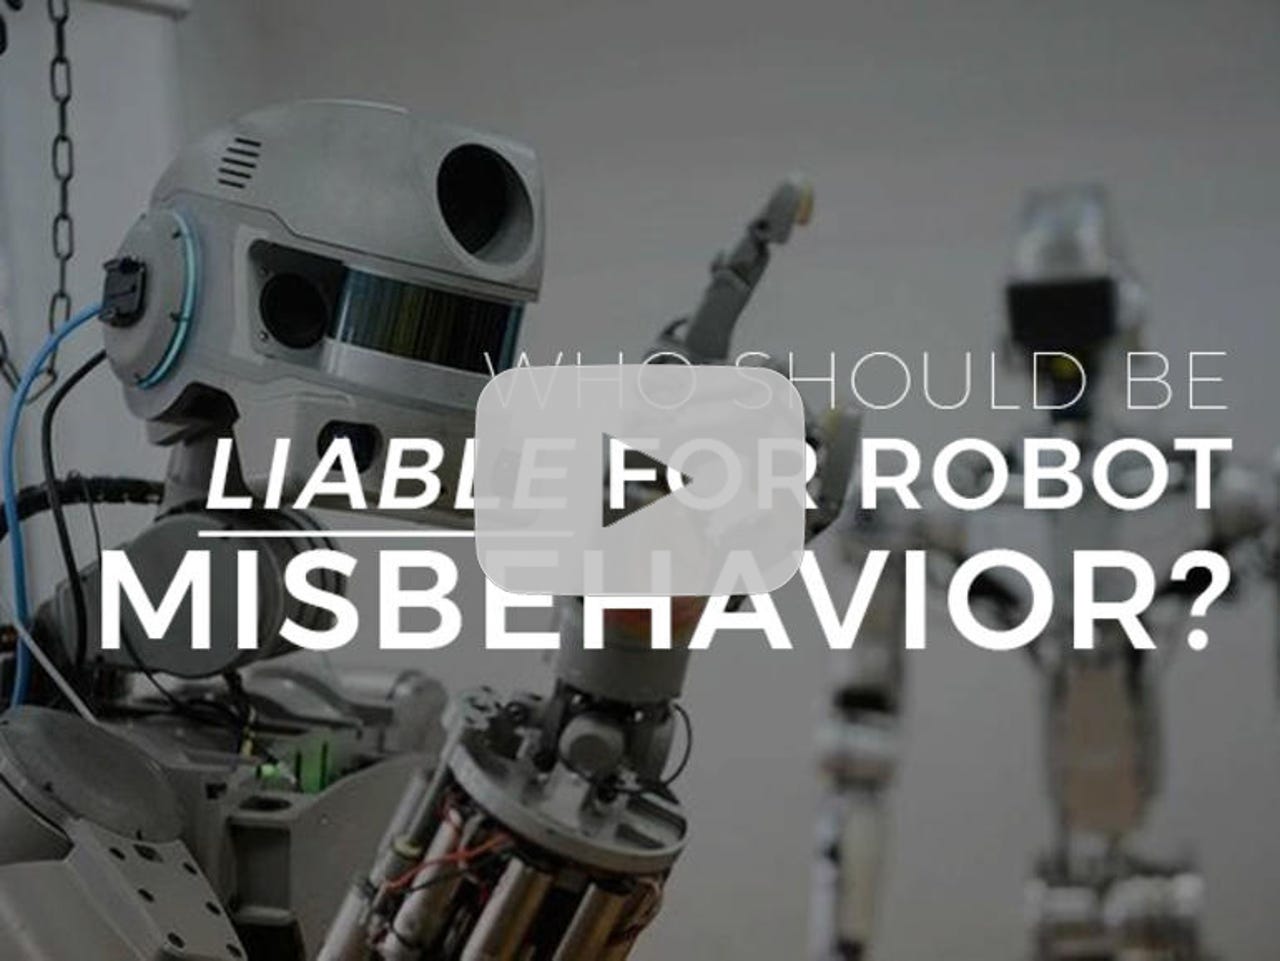 Who should be liable for robot misbehavior?